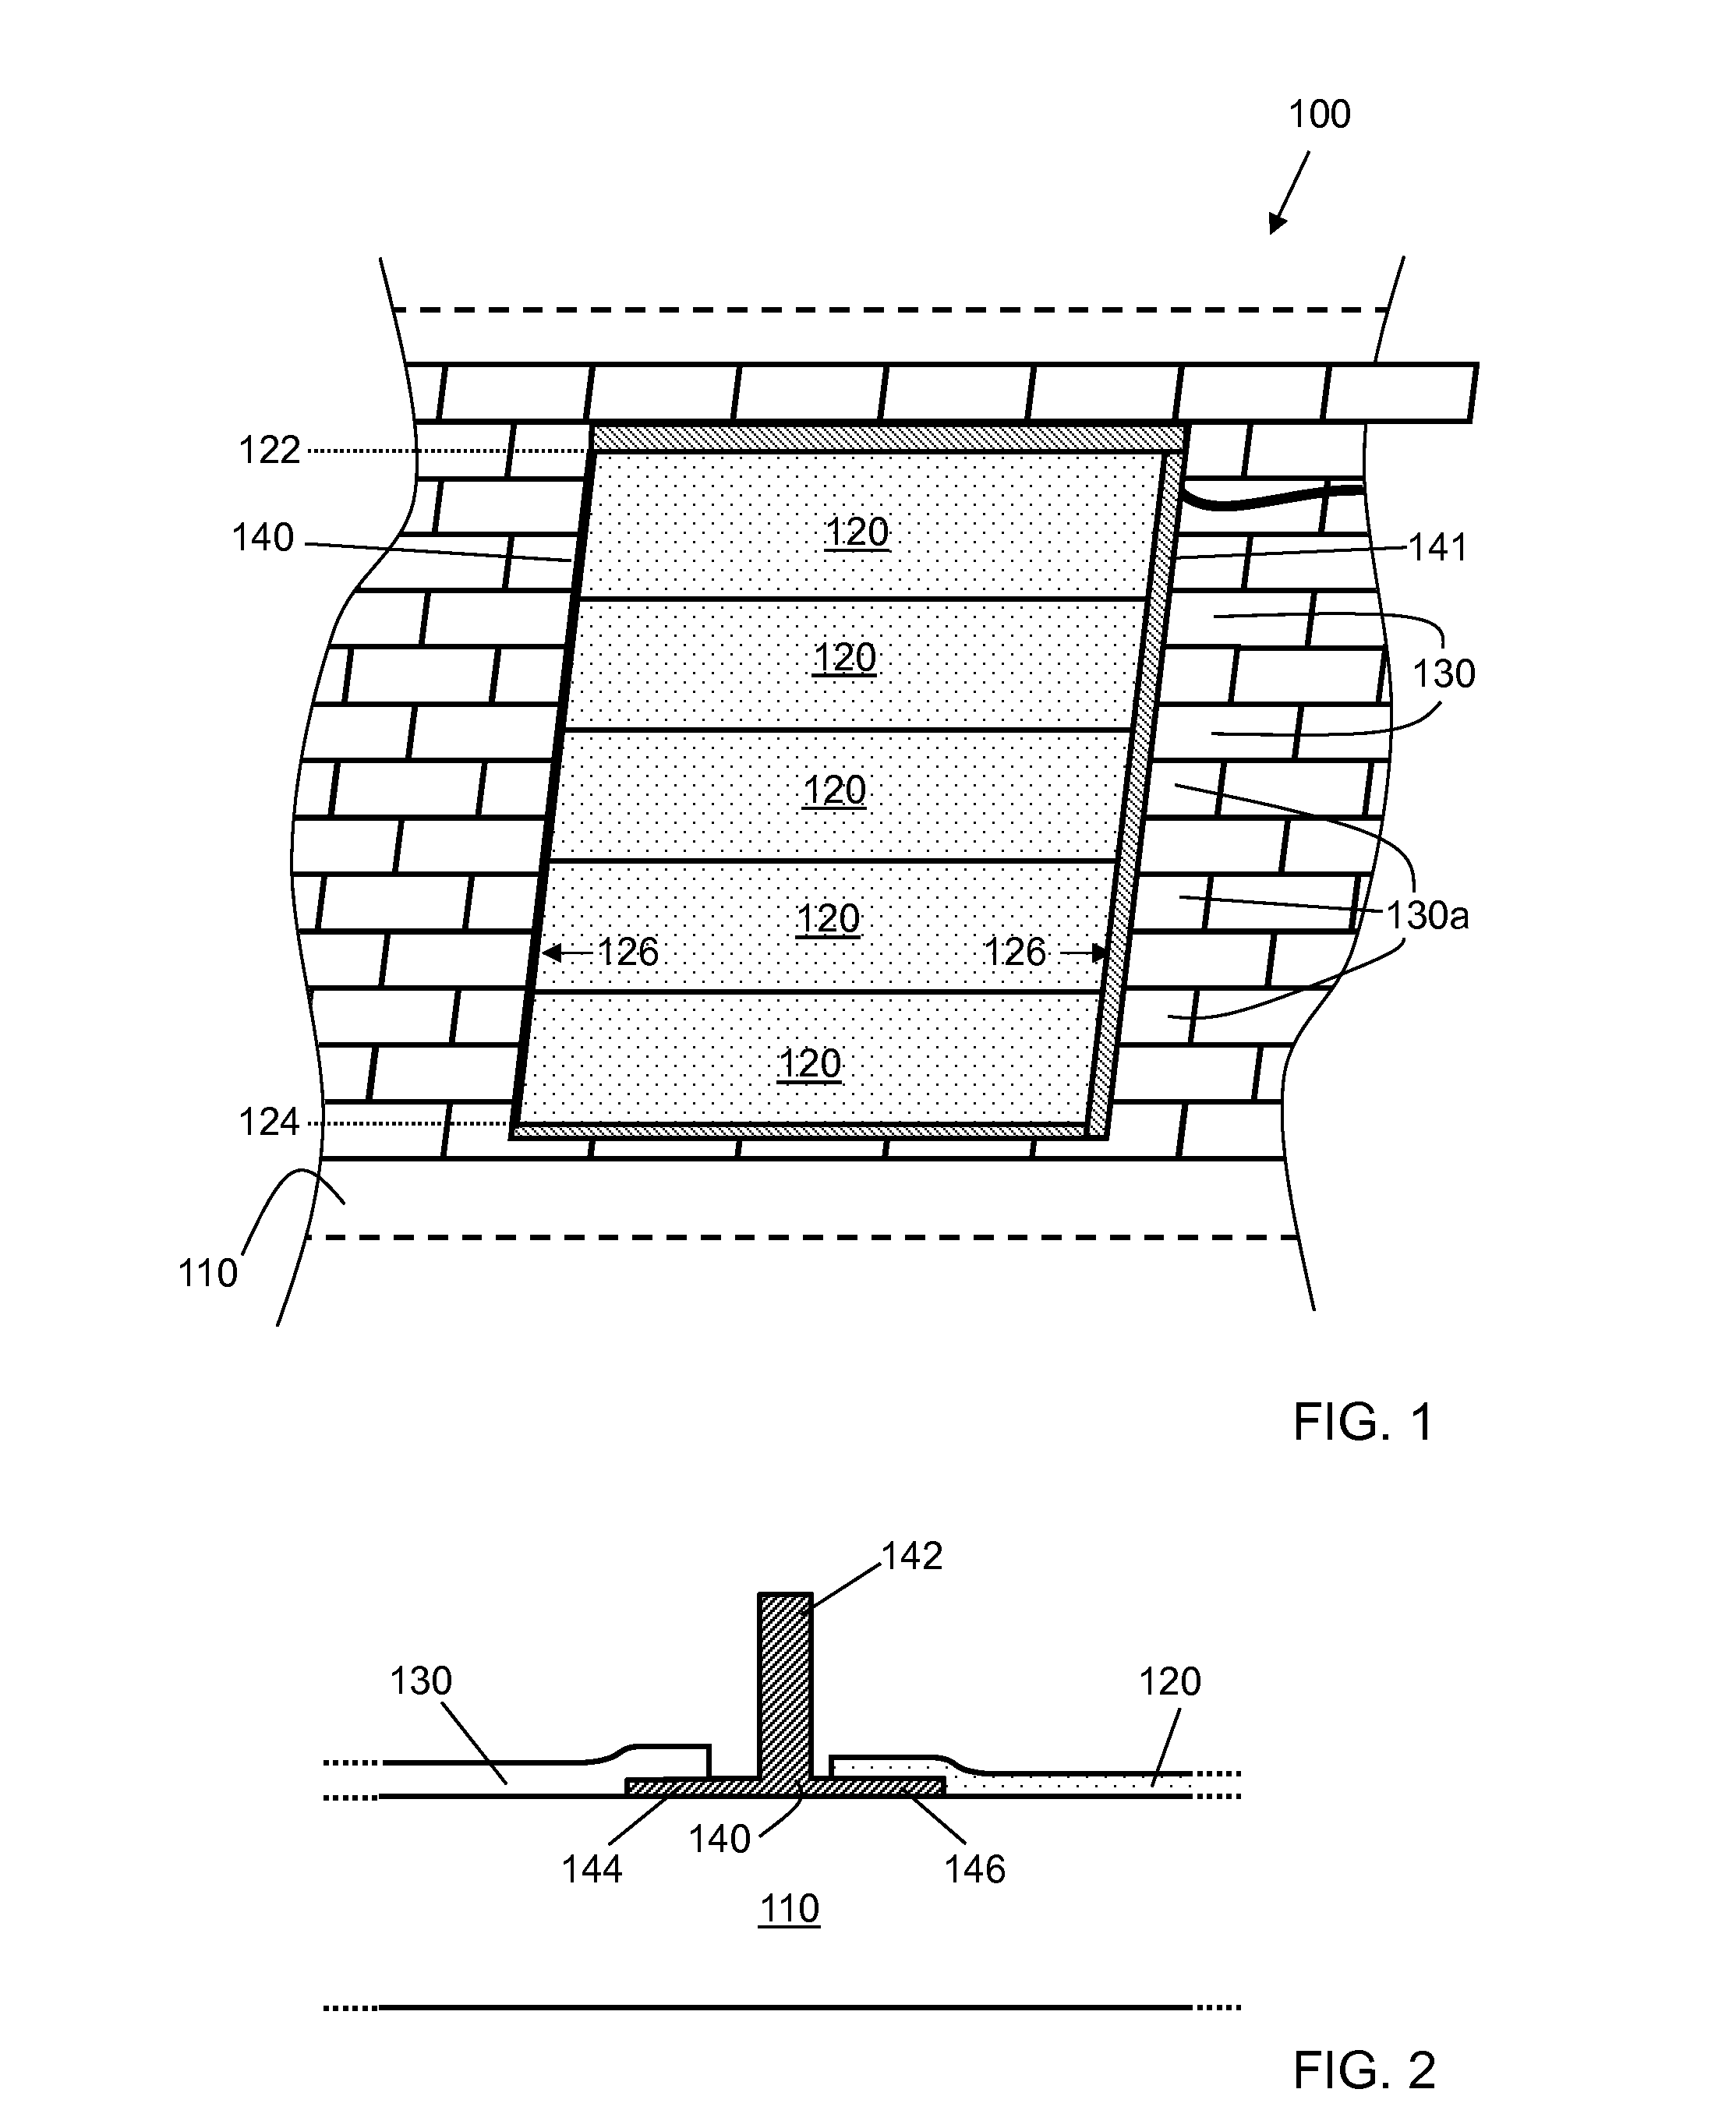 Photovoltaic Systems, methods For Installing Photovoltaic Systems, And Kits For Installing Photovoltaic Systems